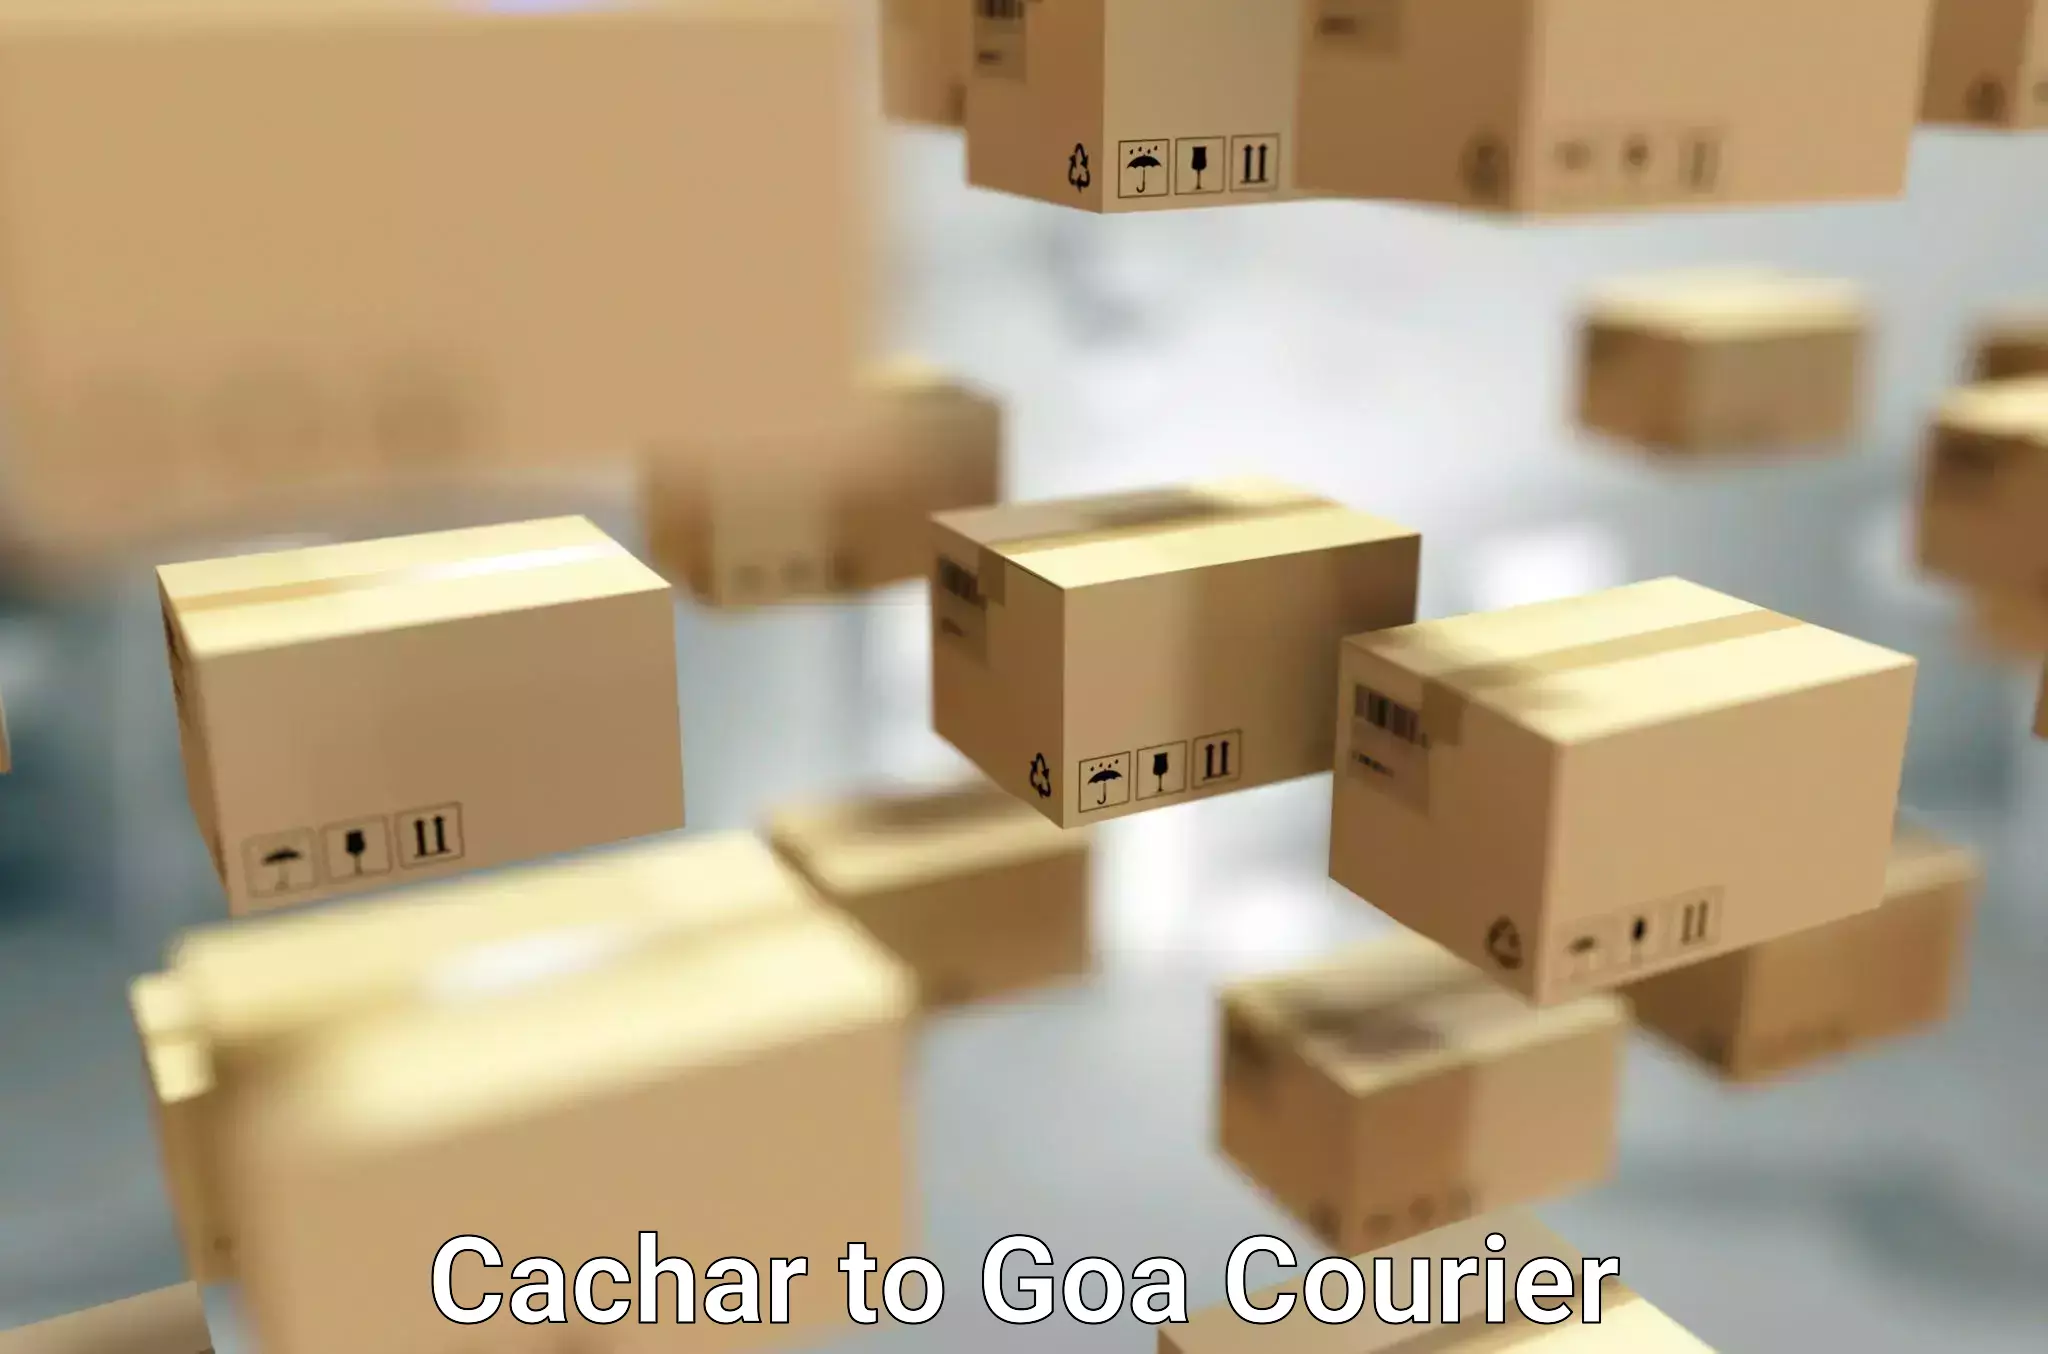 Moving and packing experts Cachar to Goa